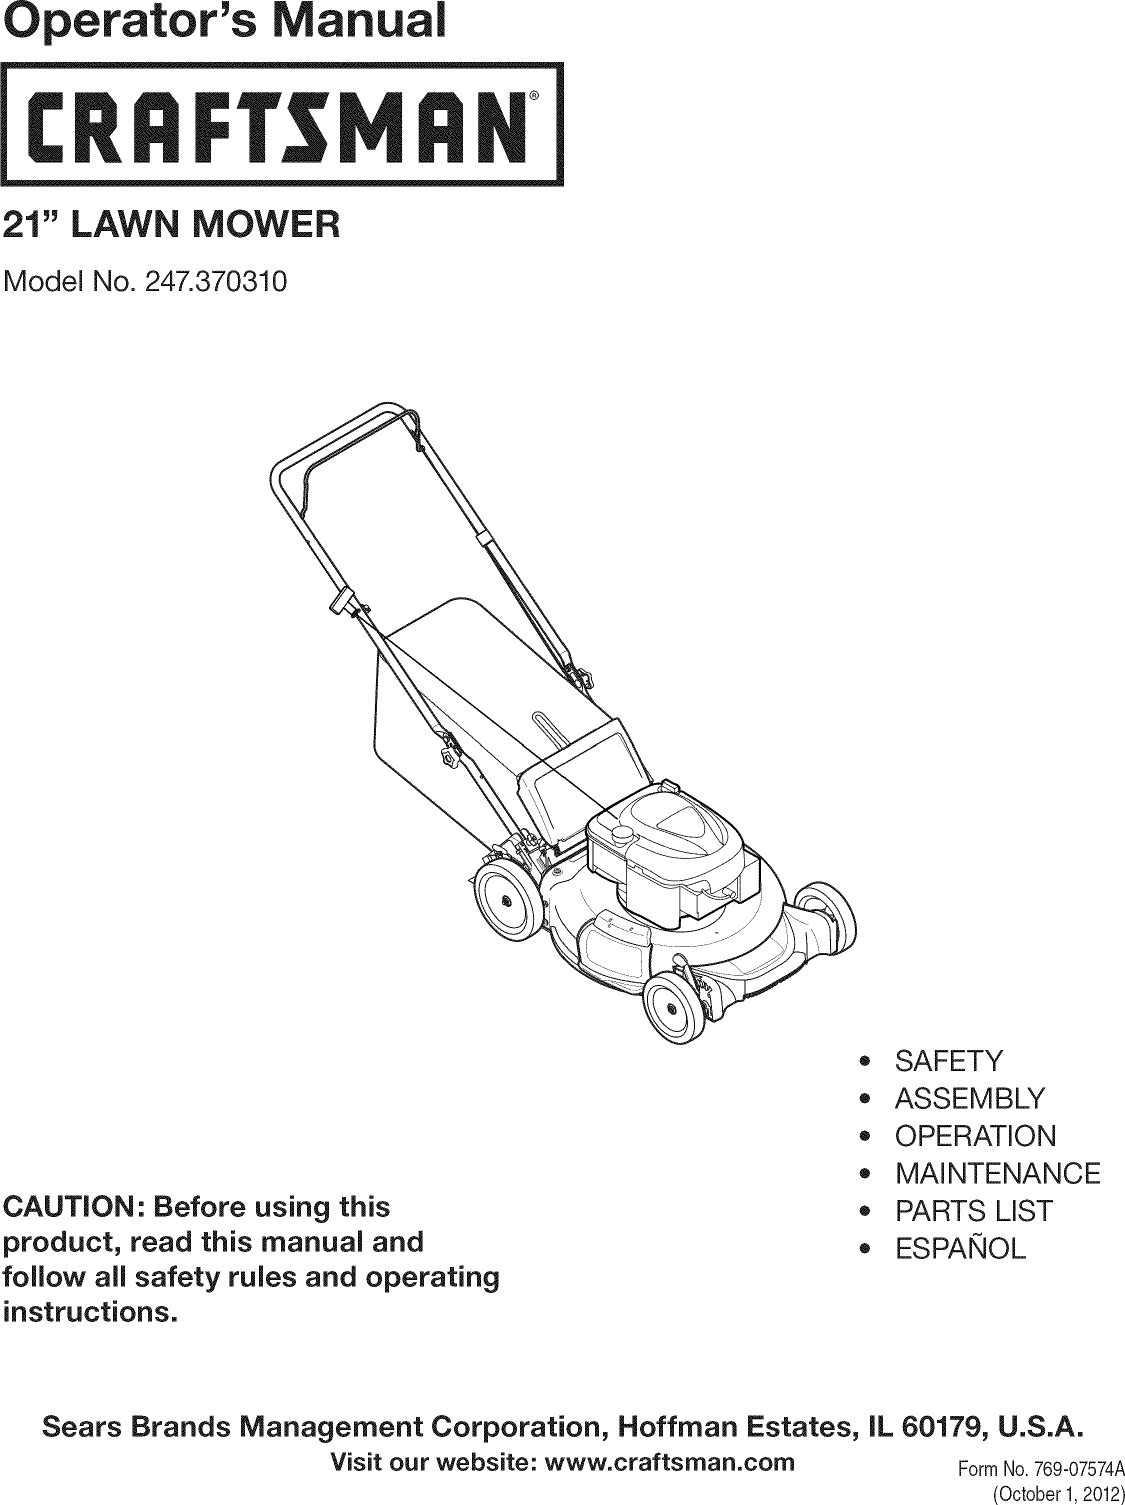 Craftsman 247370310 User Manual LAWN MOWER 1980'S Manuals And Guides